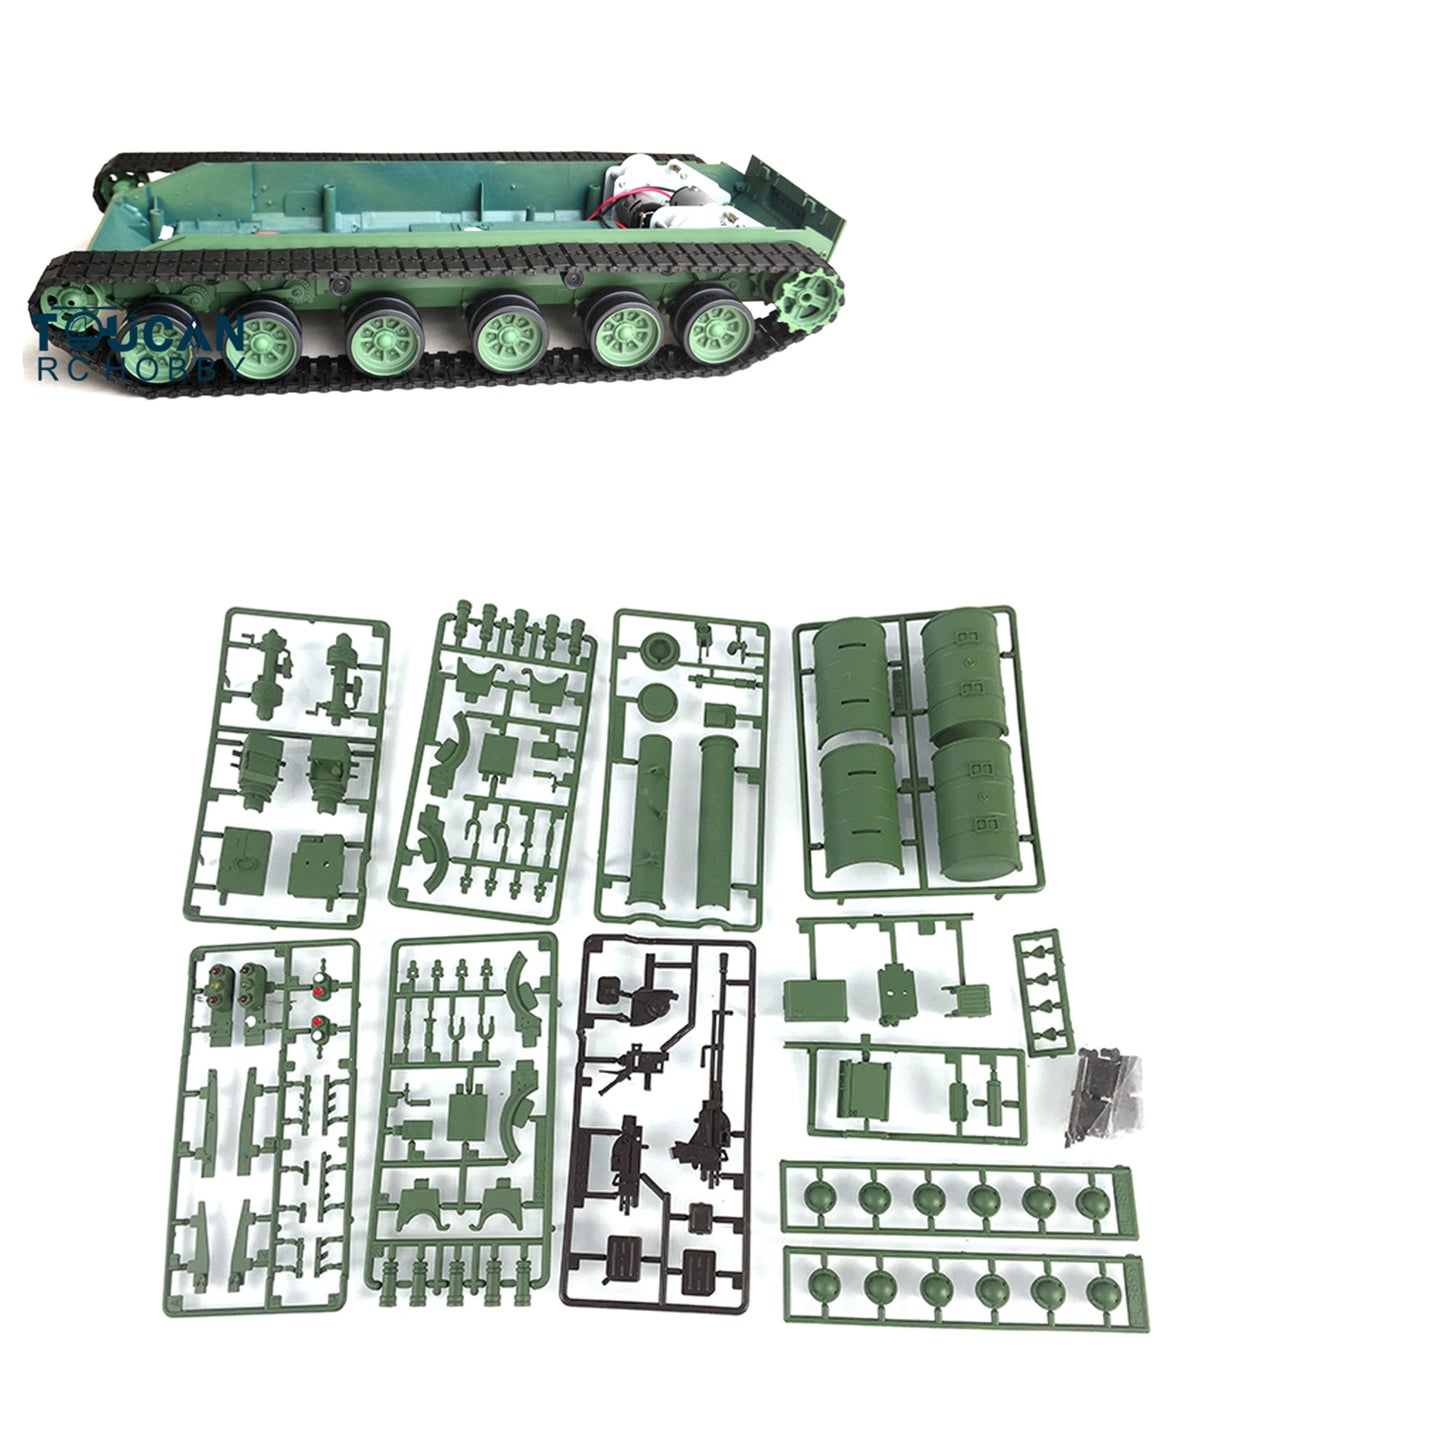 Henglong 3899A Decoration Decal Paste Sticker Plastic Chassis Parts Bag Spare Part for 1:16 Scale China 99A RC Tank Model